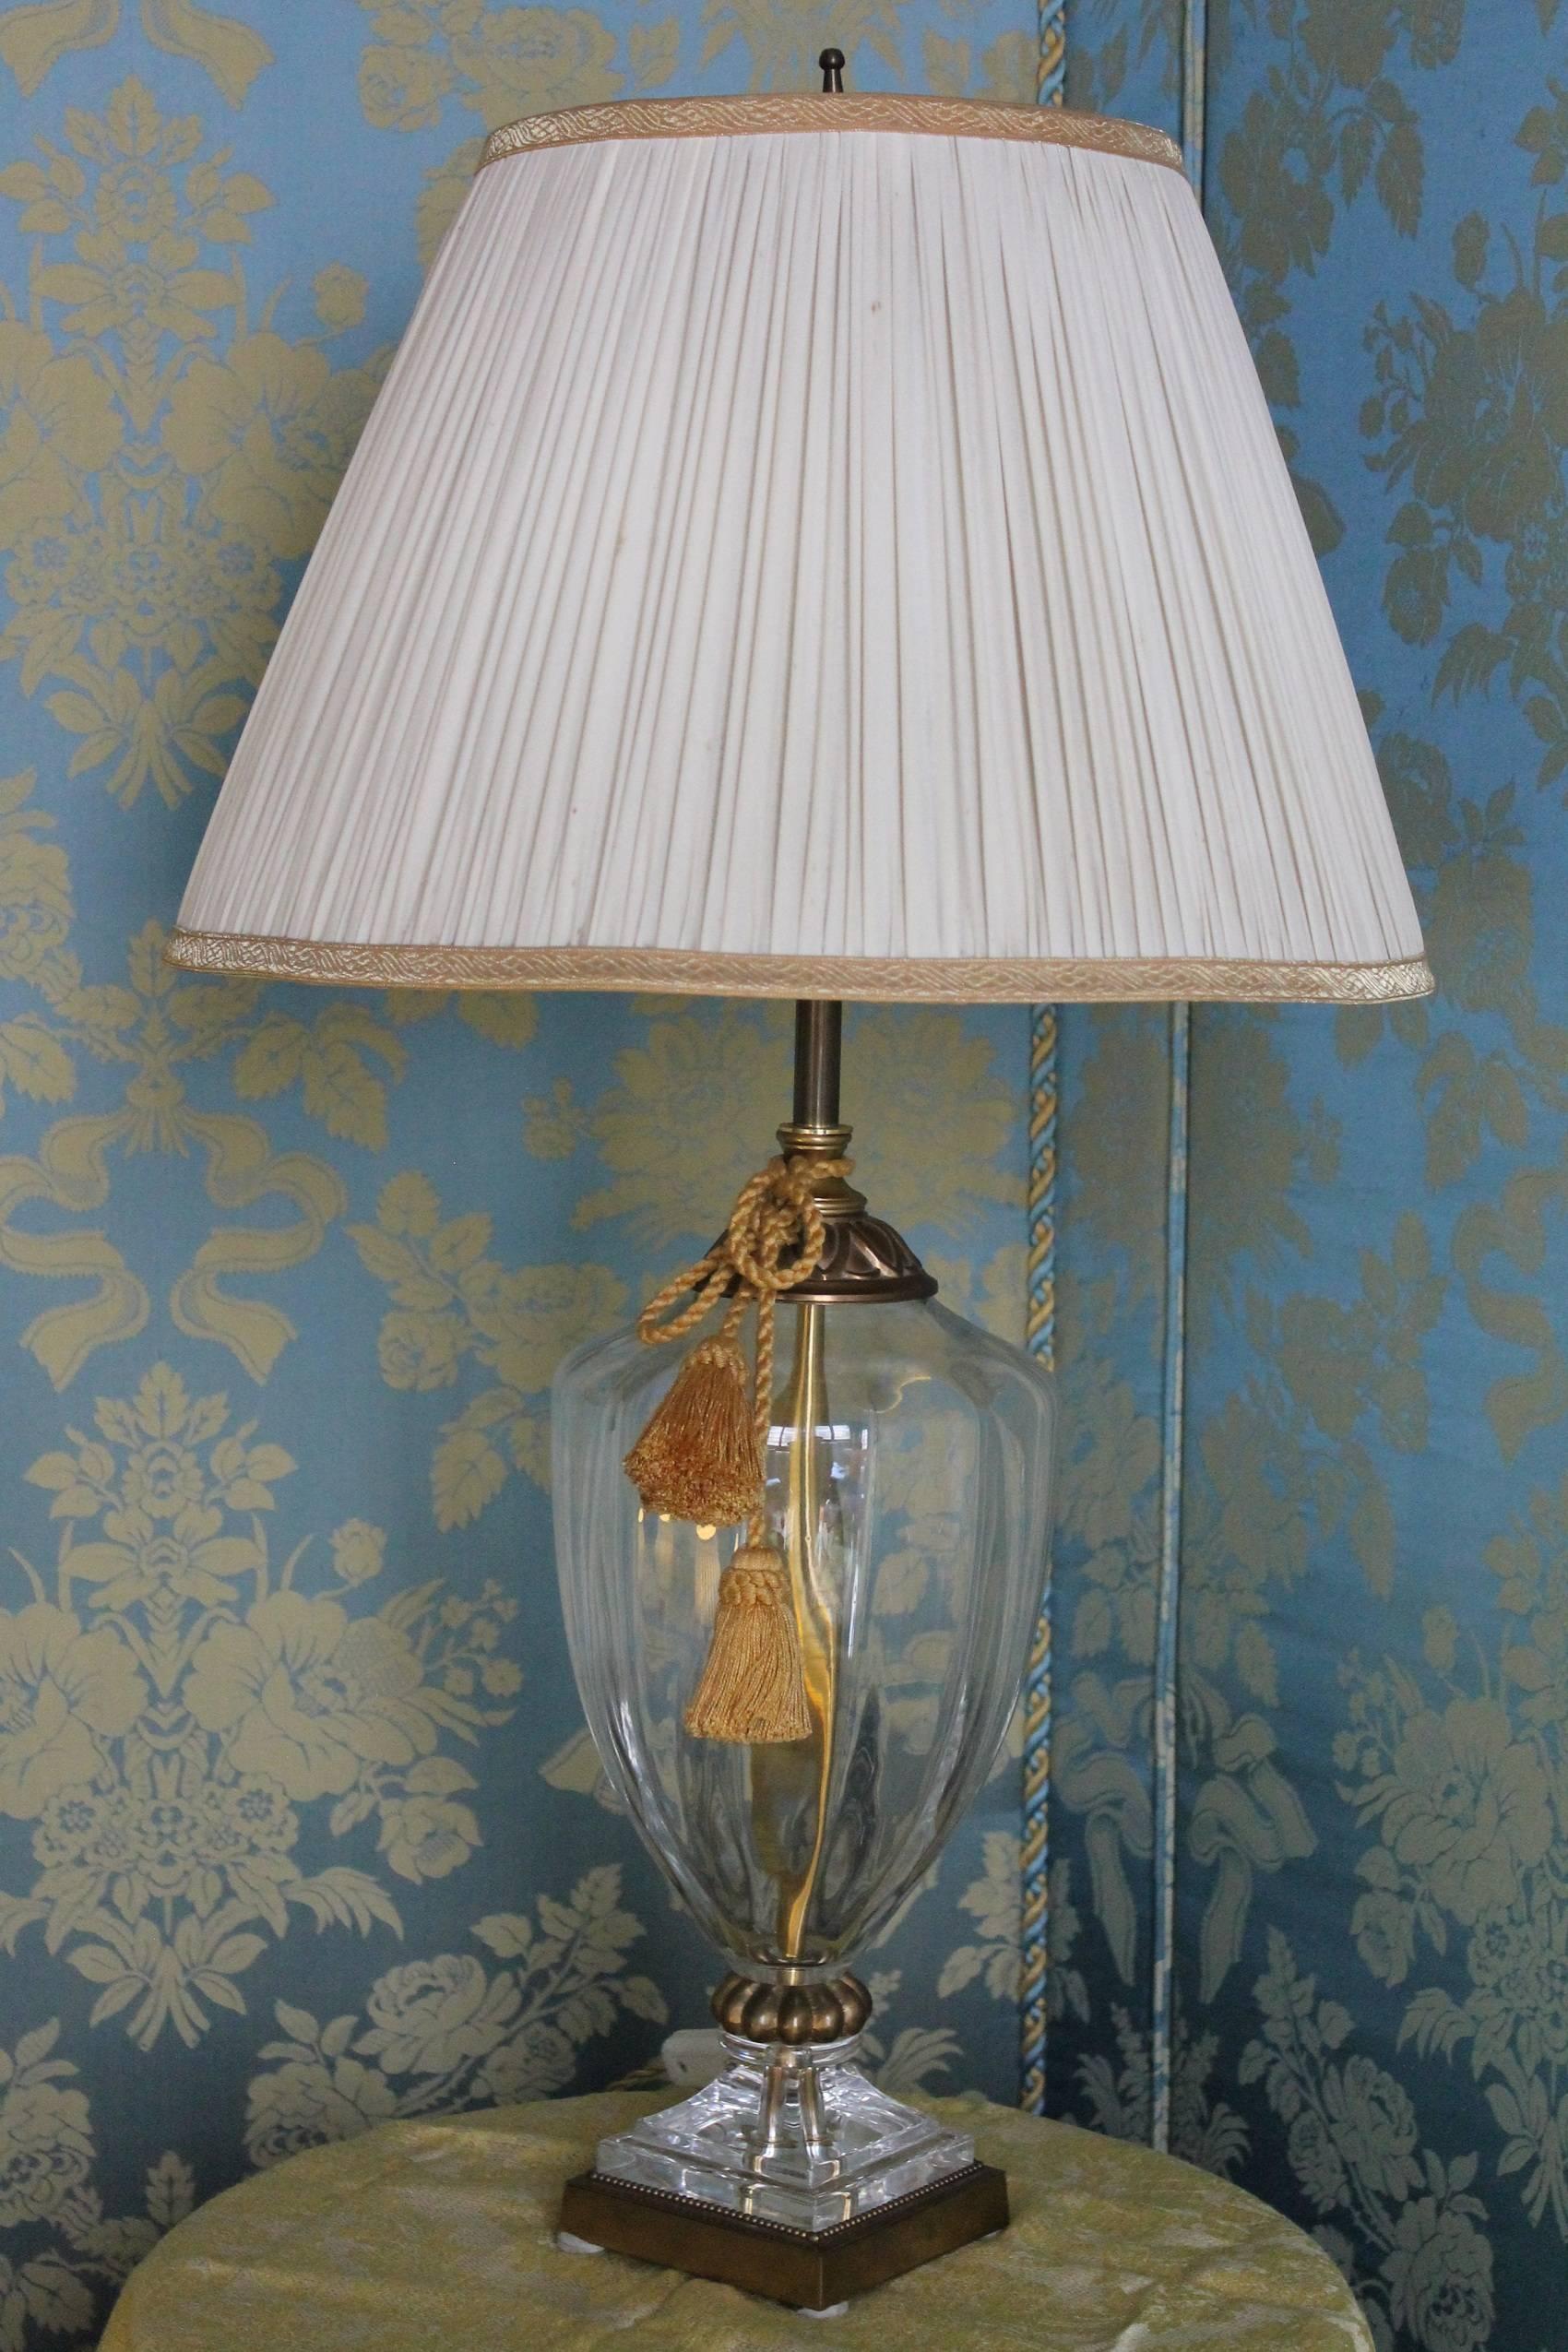 An Italian two lights vintage 1950s sparkling, fluted, solid crystal table lamp with gilded brass accents resting on a square beaded brass gold colored base. This sophisticated Mid-Century Modern piece has a traditional-shape and features hand-cut